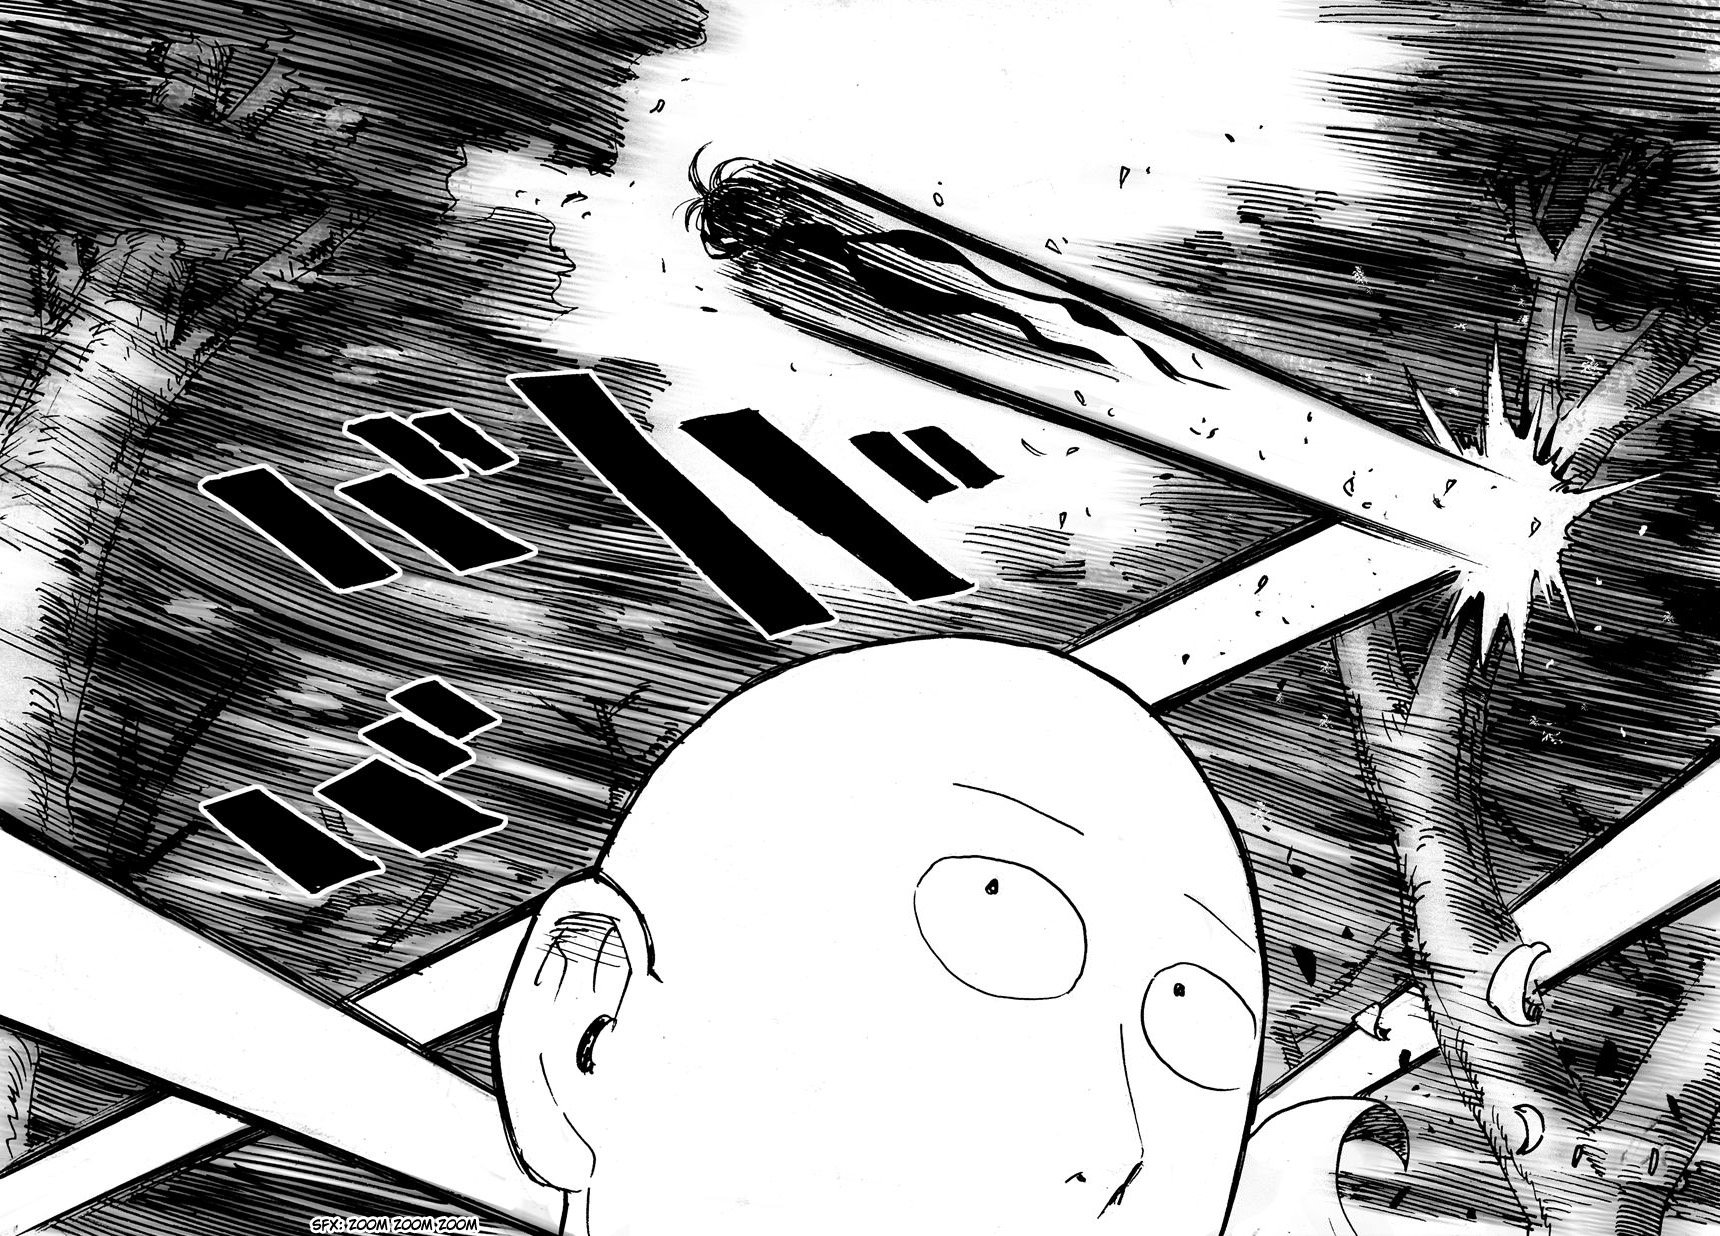 One Punch Man, Chapter 15 - Fun and Work image 08